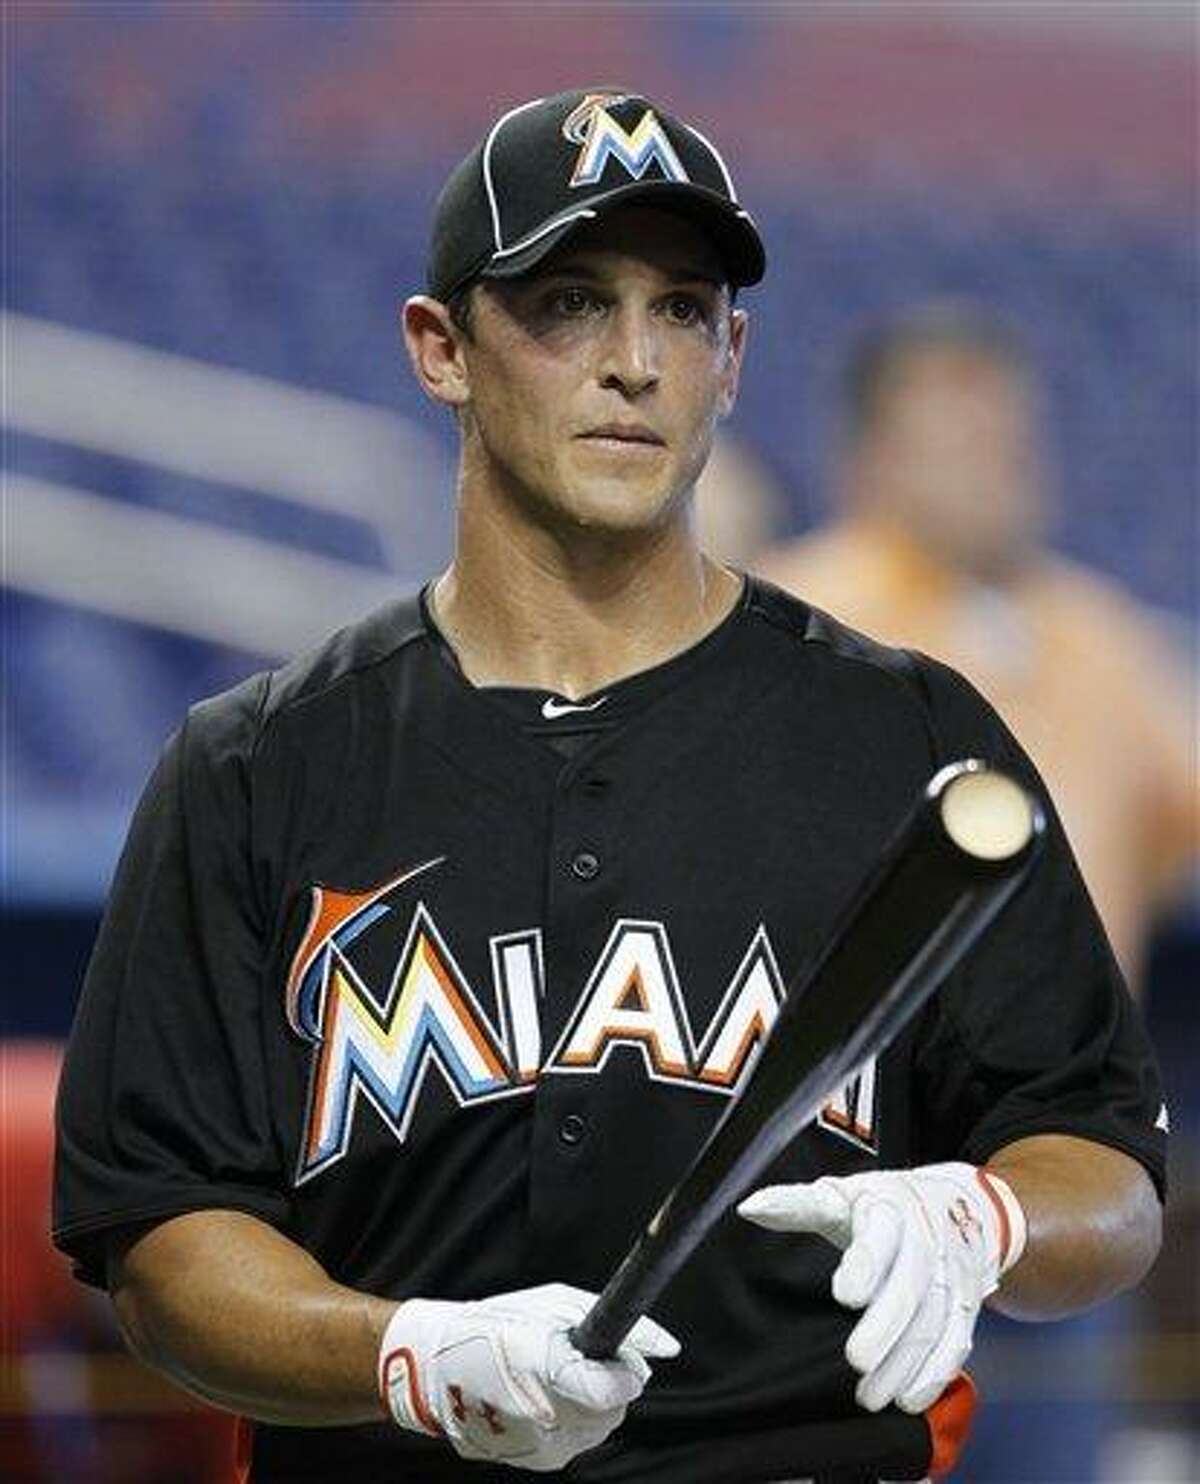 Adam Greenberg prepares for batting practice before a baseball game against the New York Mets in Miami, Tuesday, Oct. 2, 2012. The Miami Marlins signed the former Chicago Cubs prospect to a one-day contract effective Oct. 2, and play him that day against the New York Mets. (AP Photo/Alan Diaz)